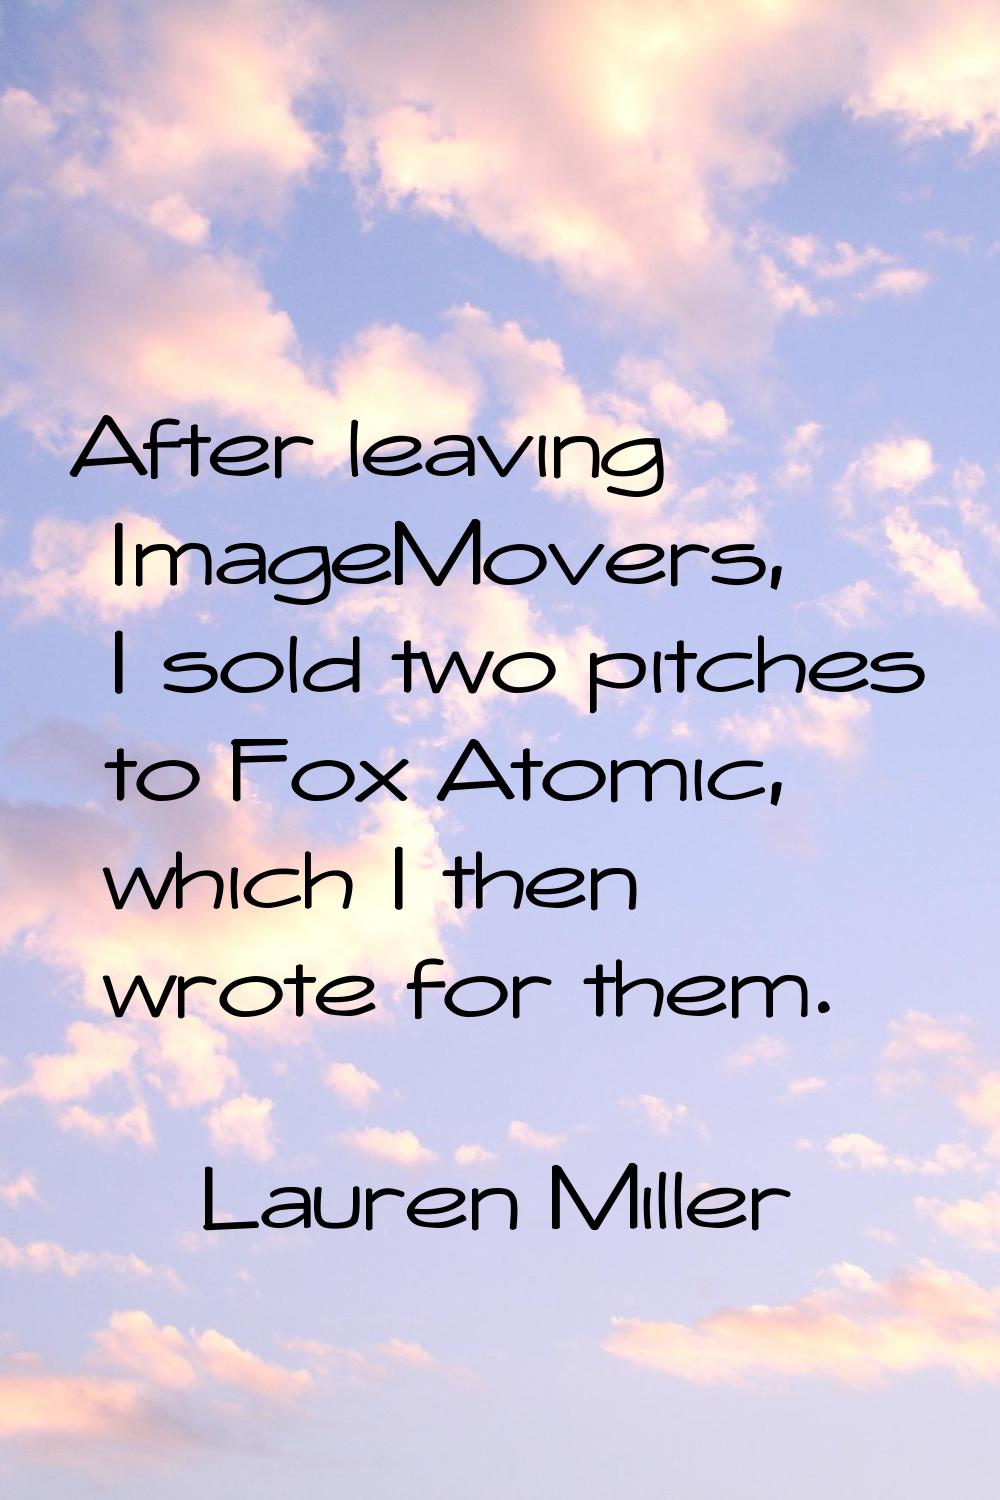 After leaving ImageMovers, I sold two pitches to Fox Atomic, which I then wrote for them.